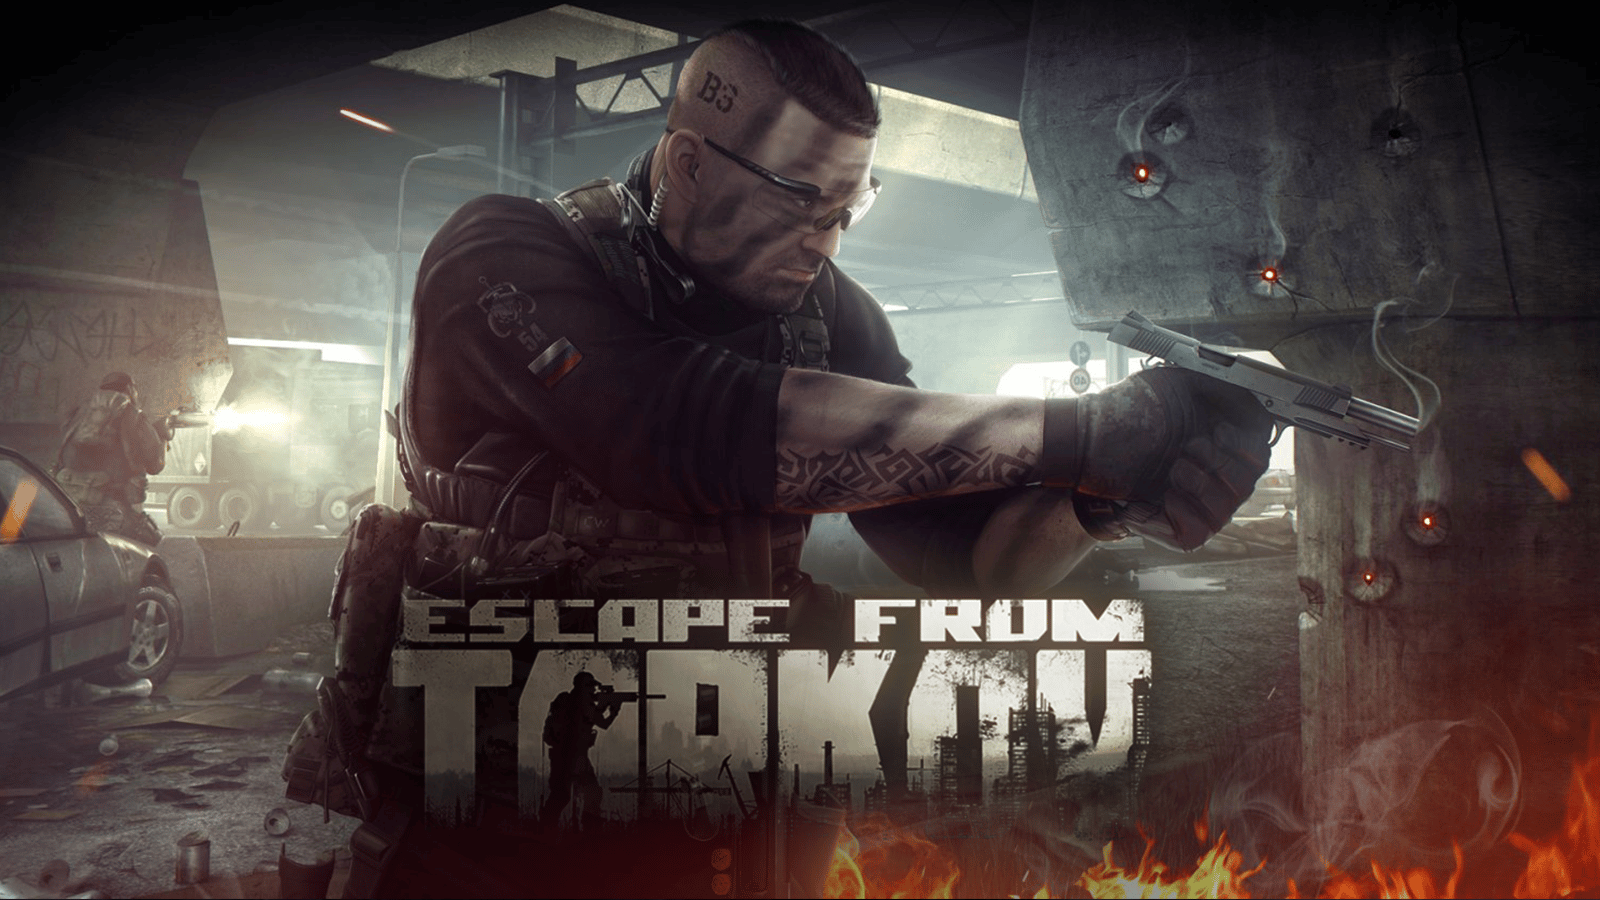 Is Escape From Tarkov Single Player?